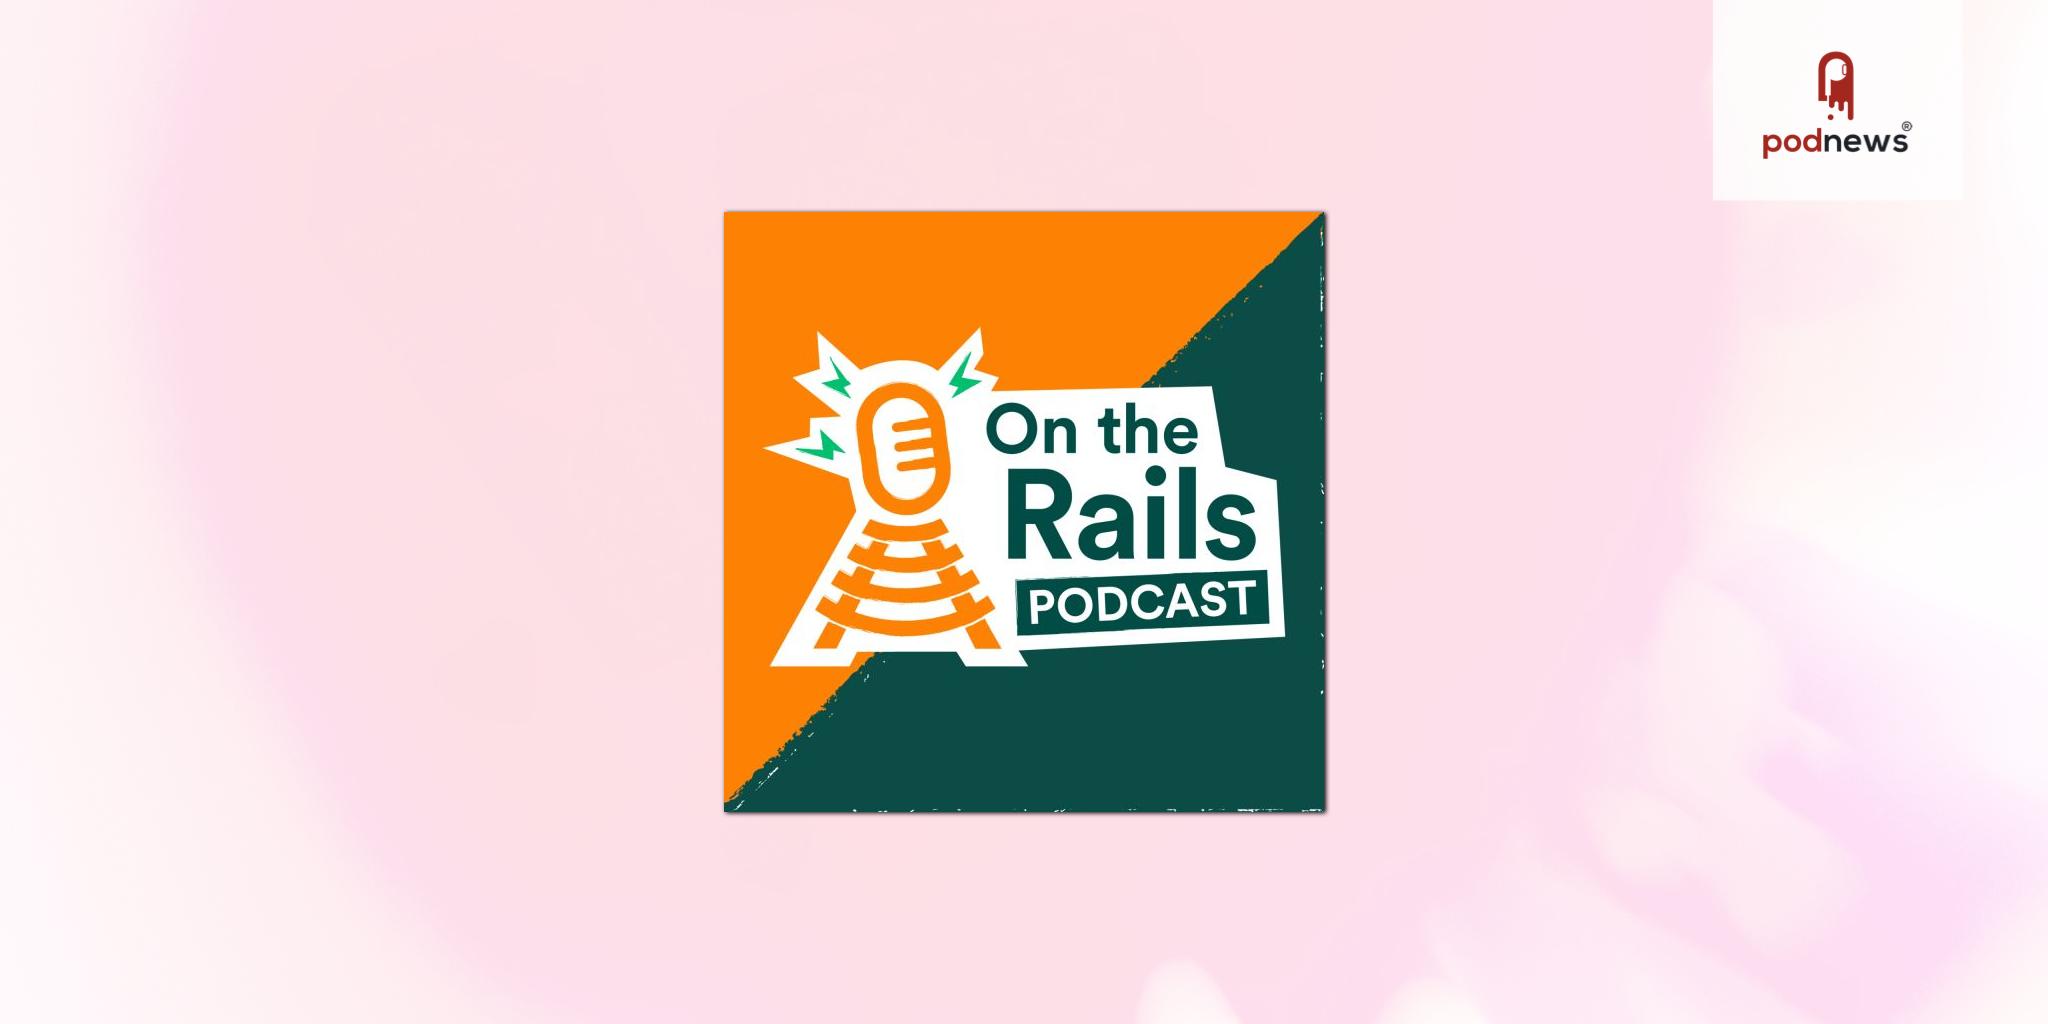 West Midlands Trains Launches New On the Rails Podcast